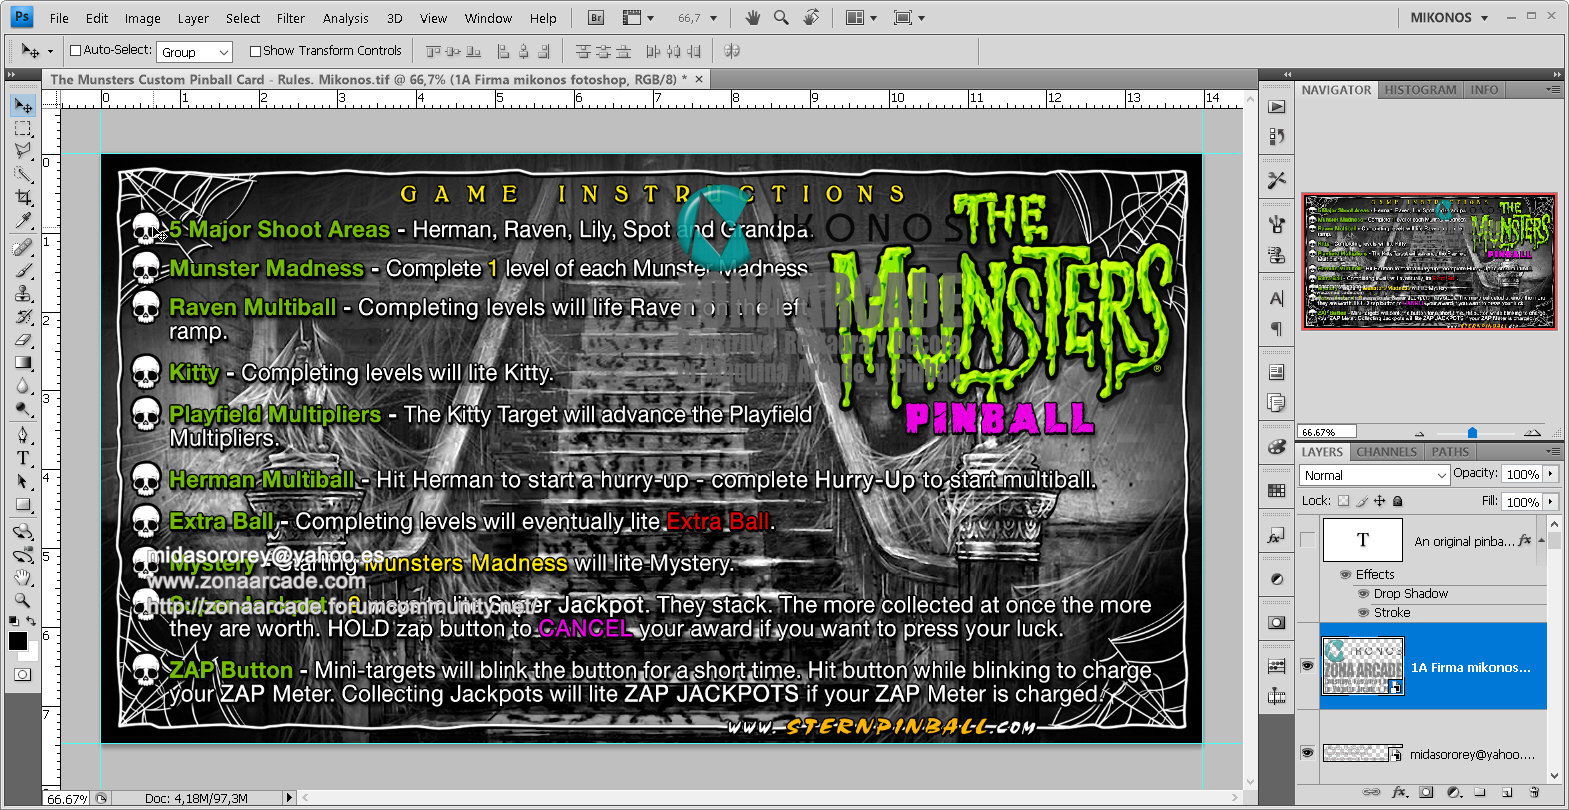 The Munsters Pinball Card Customized - Rules. Mikonos1